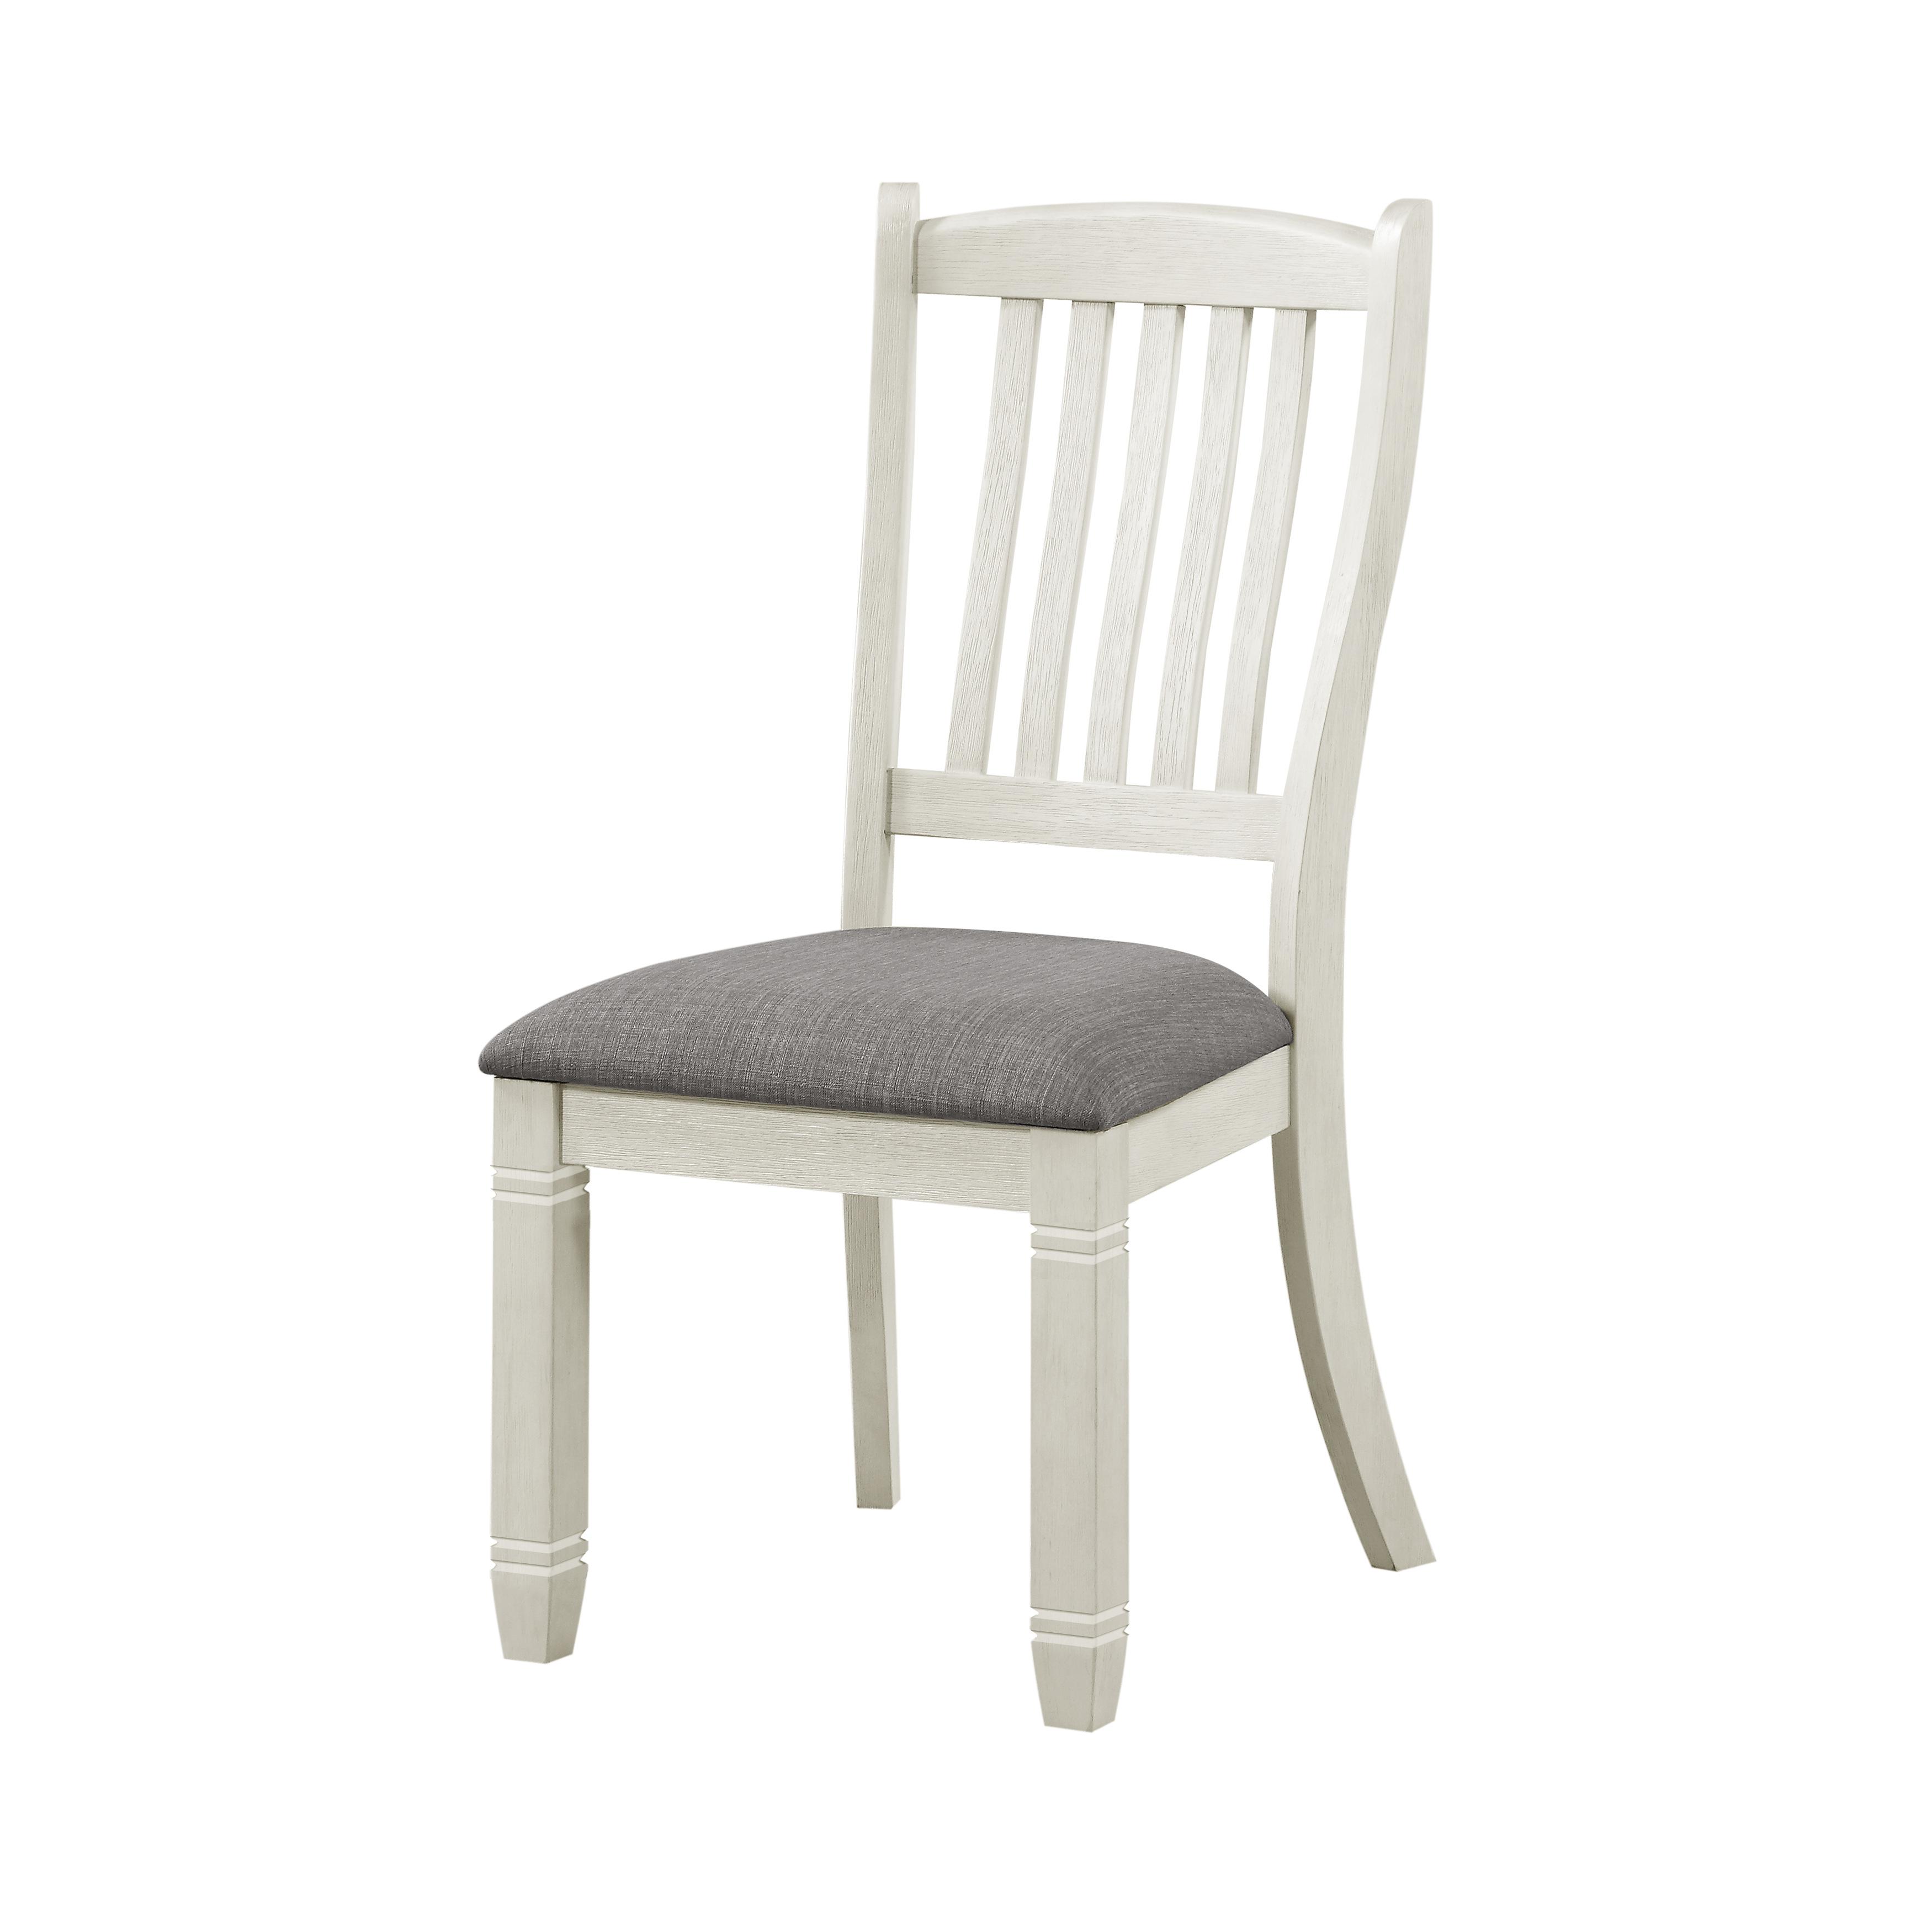 Casual Side Chair Set 5627NWS Granby 5627NWS in Antique White Polyester